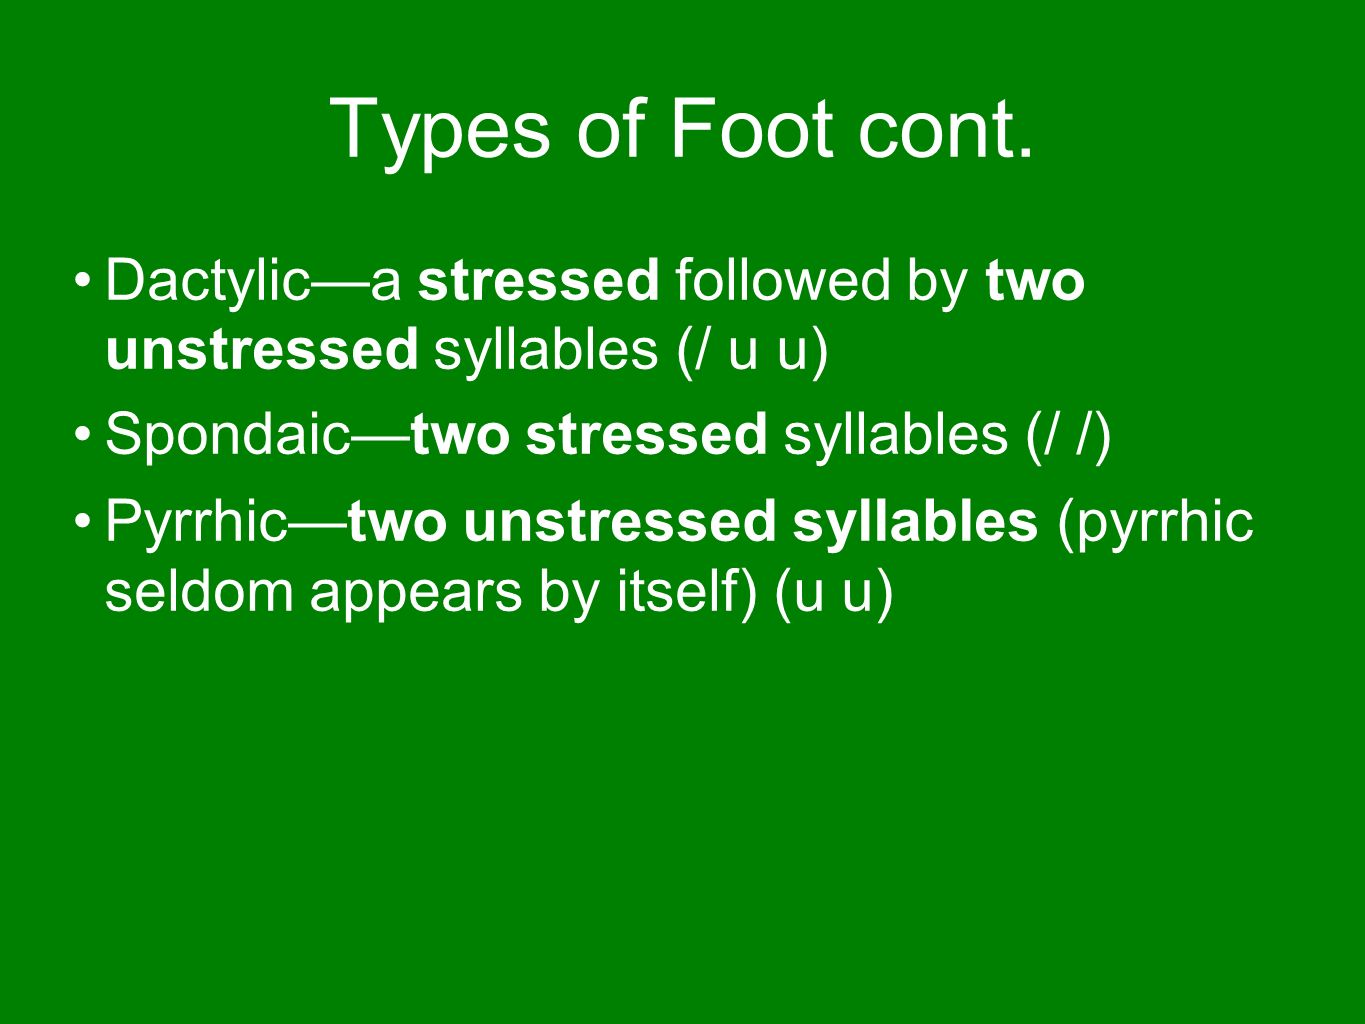 Types of Foot cont.